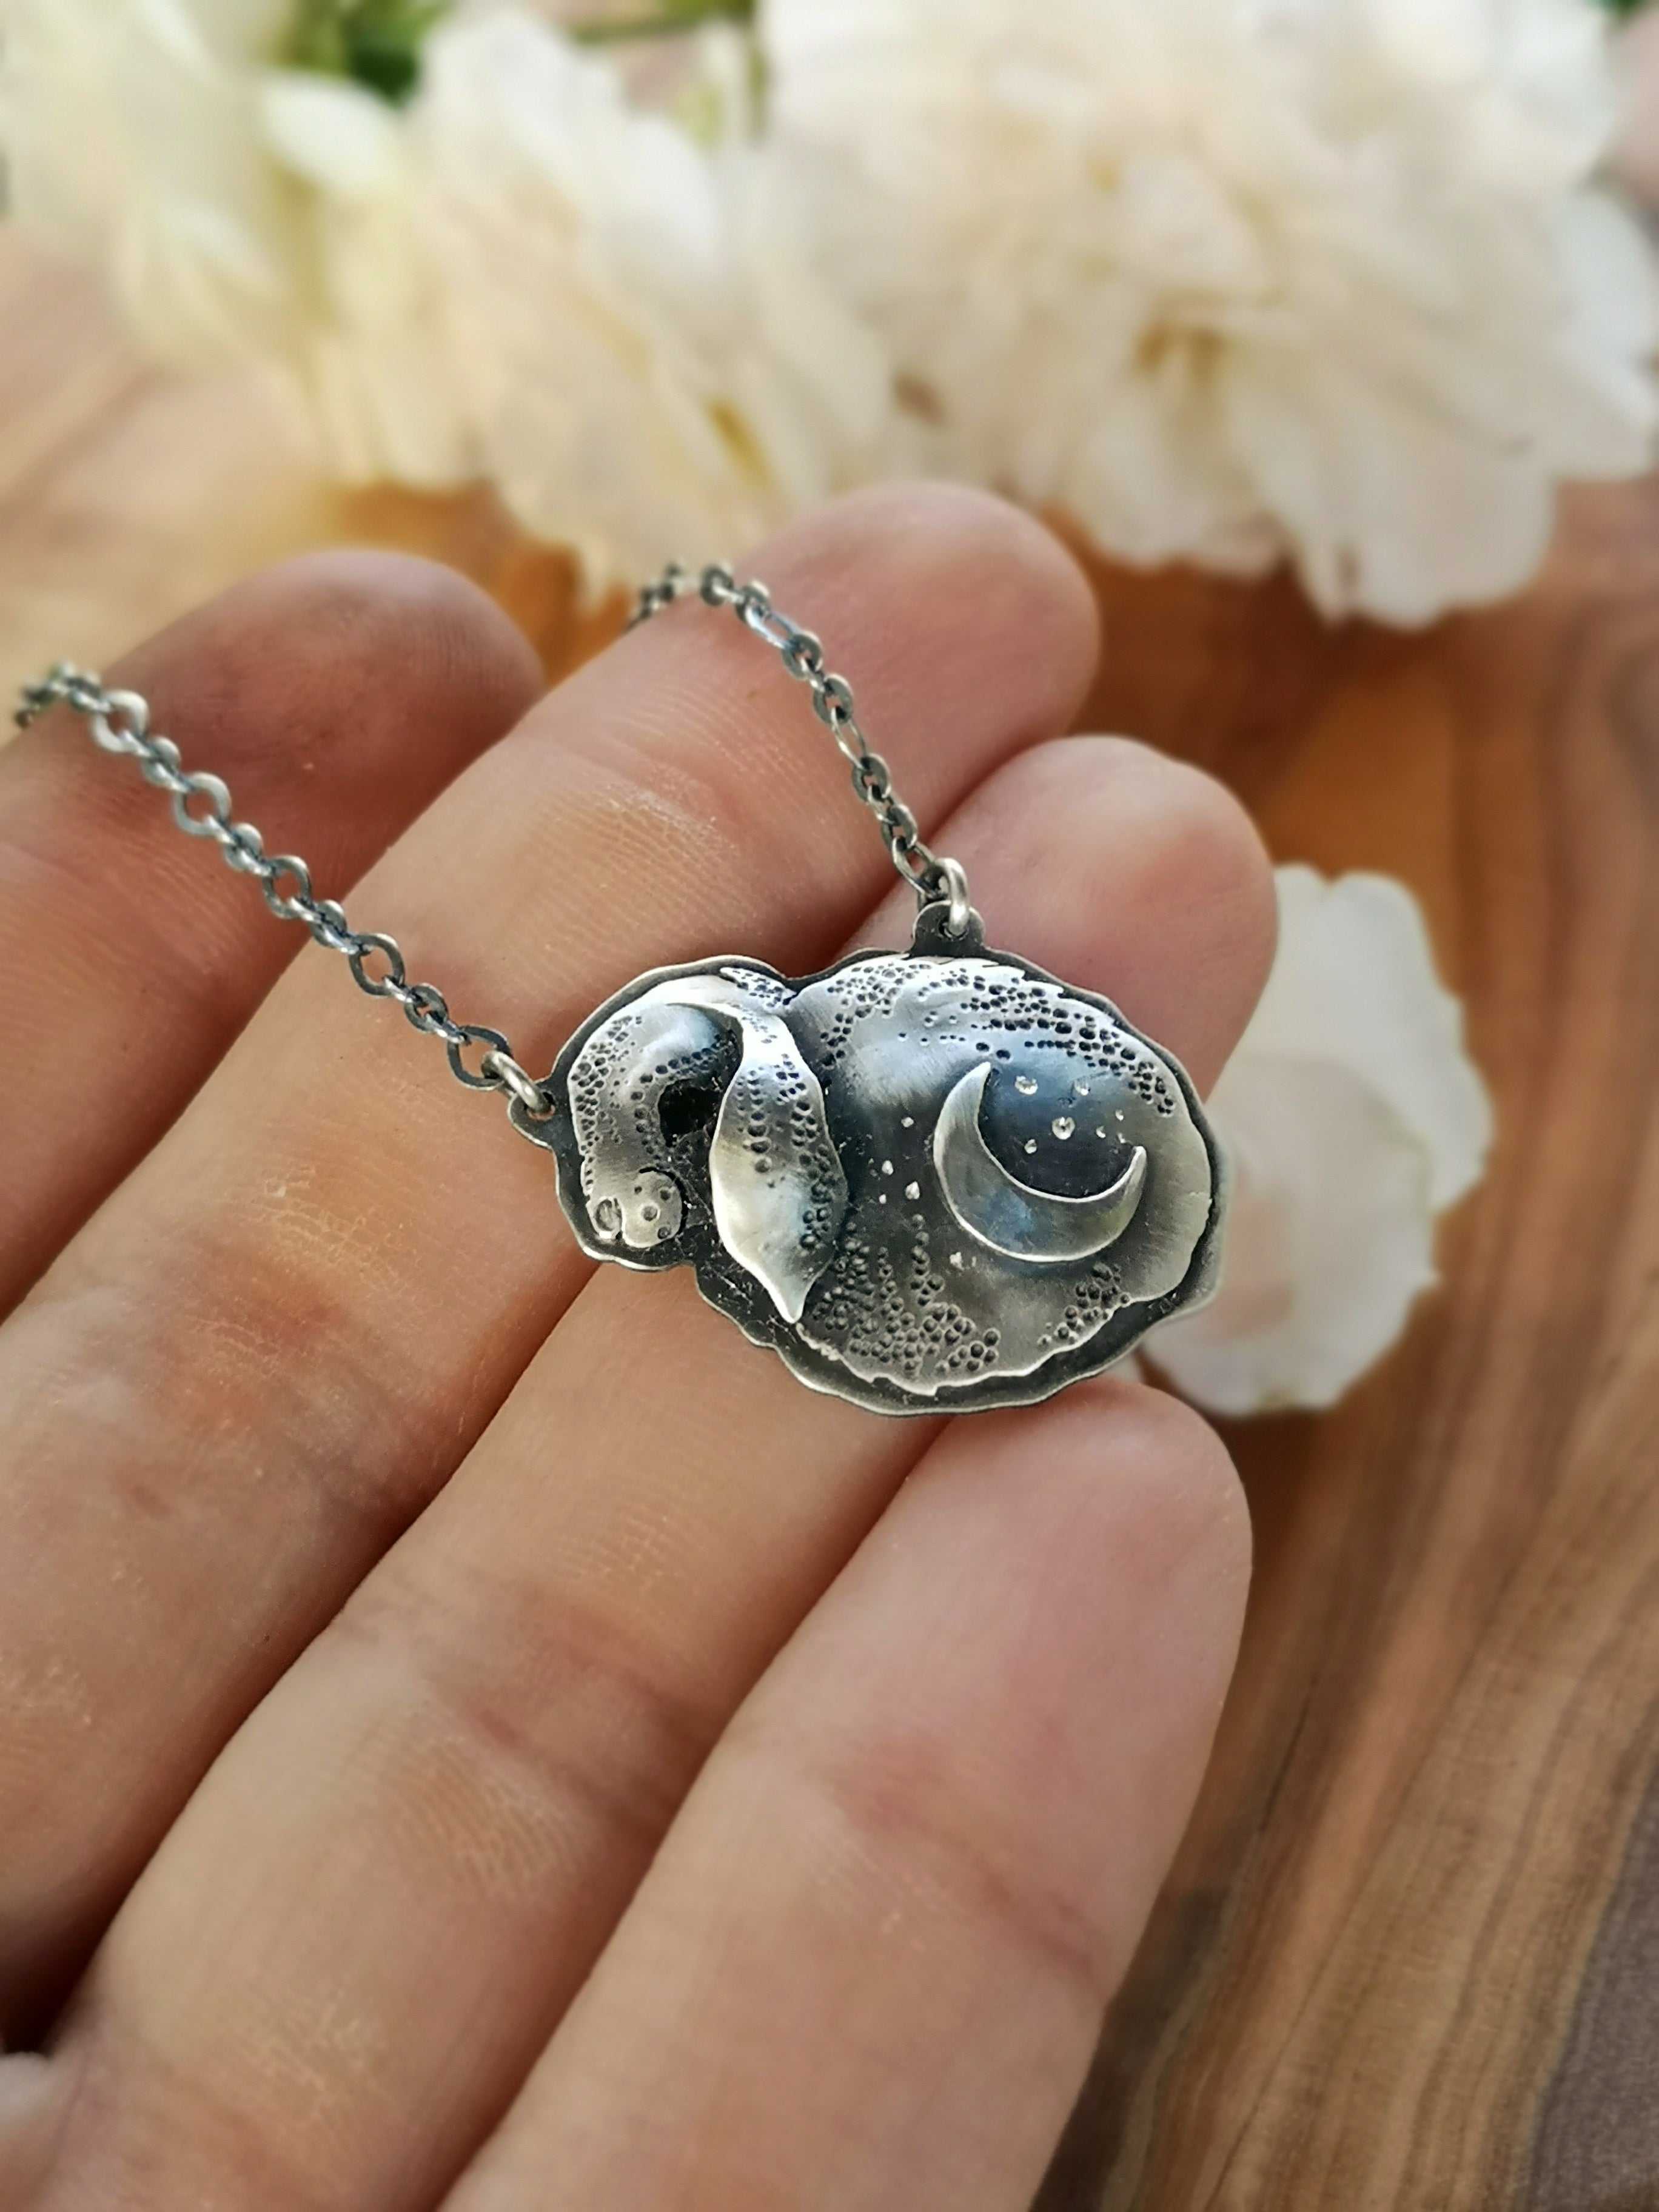 The Bunny Necklace